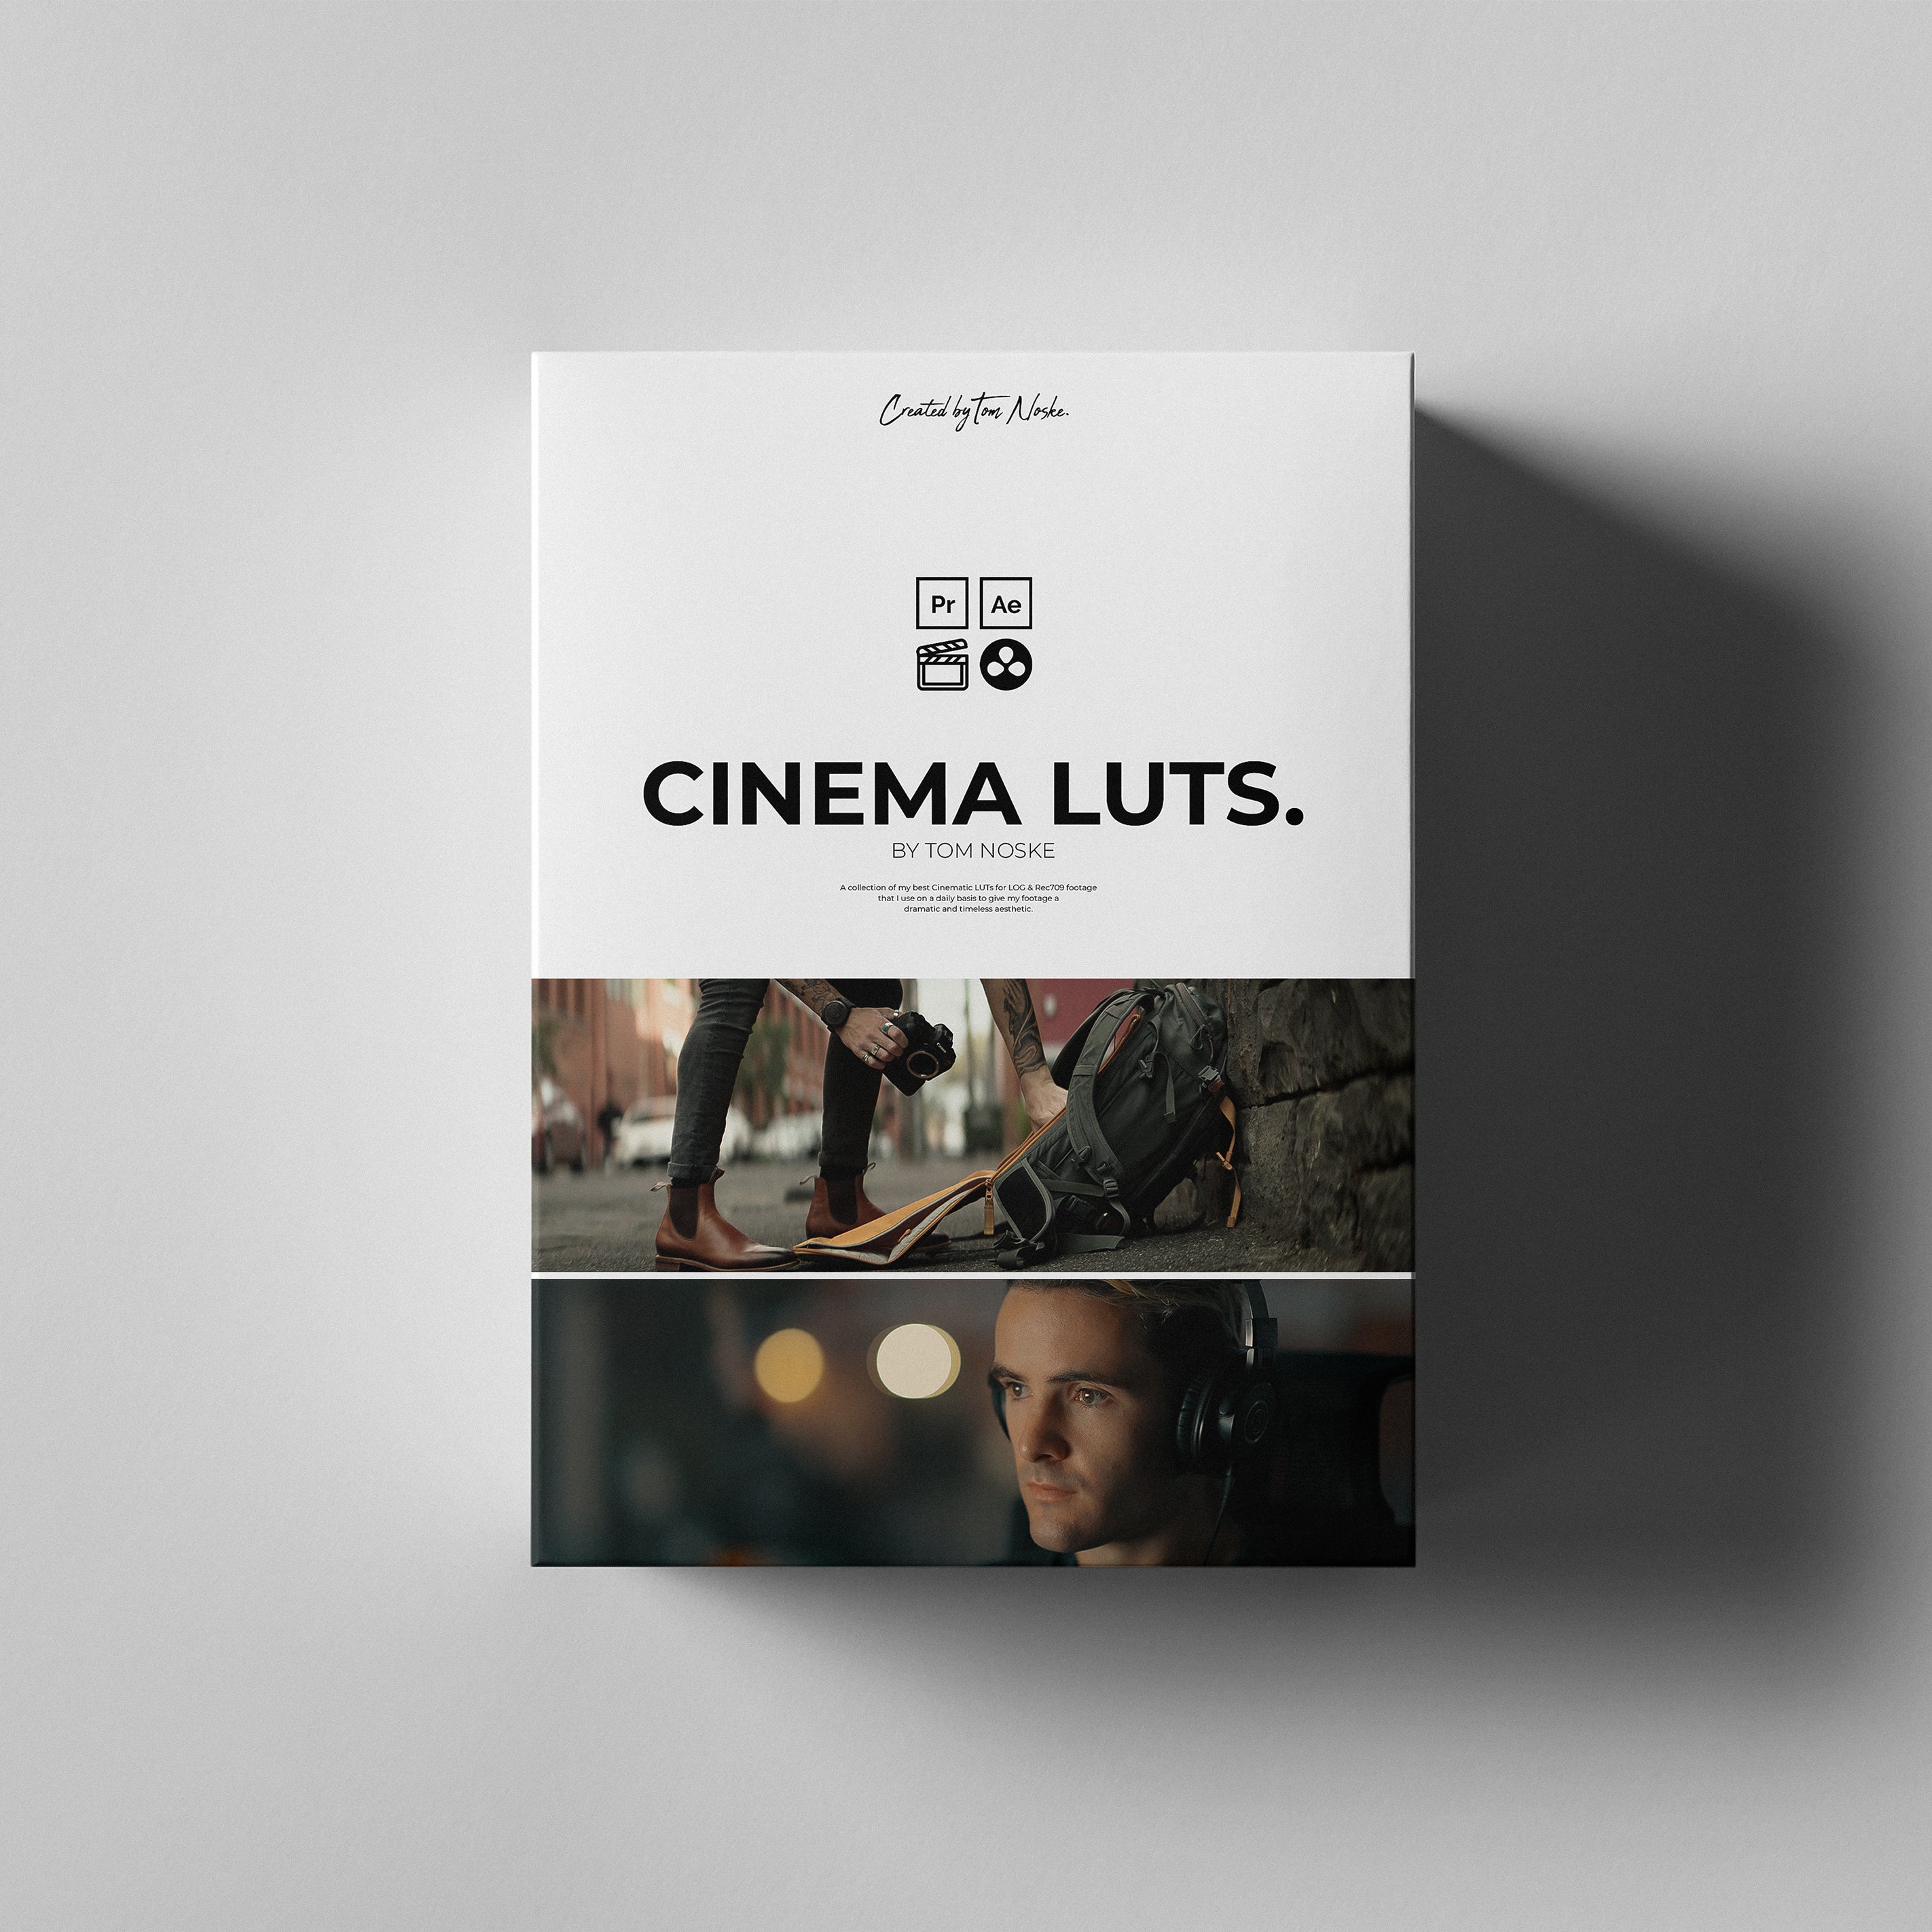 Cinematic LUT collection